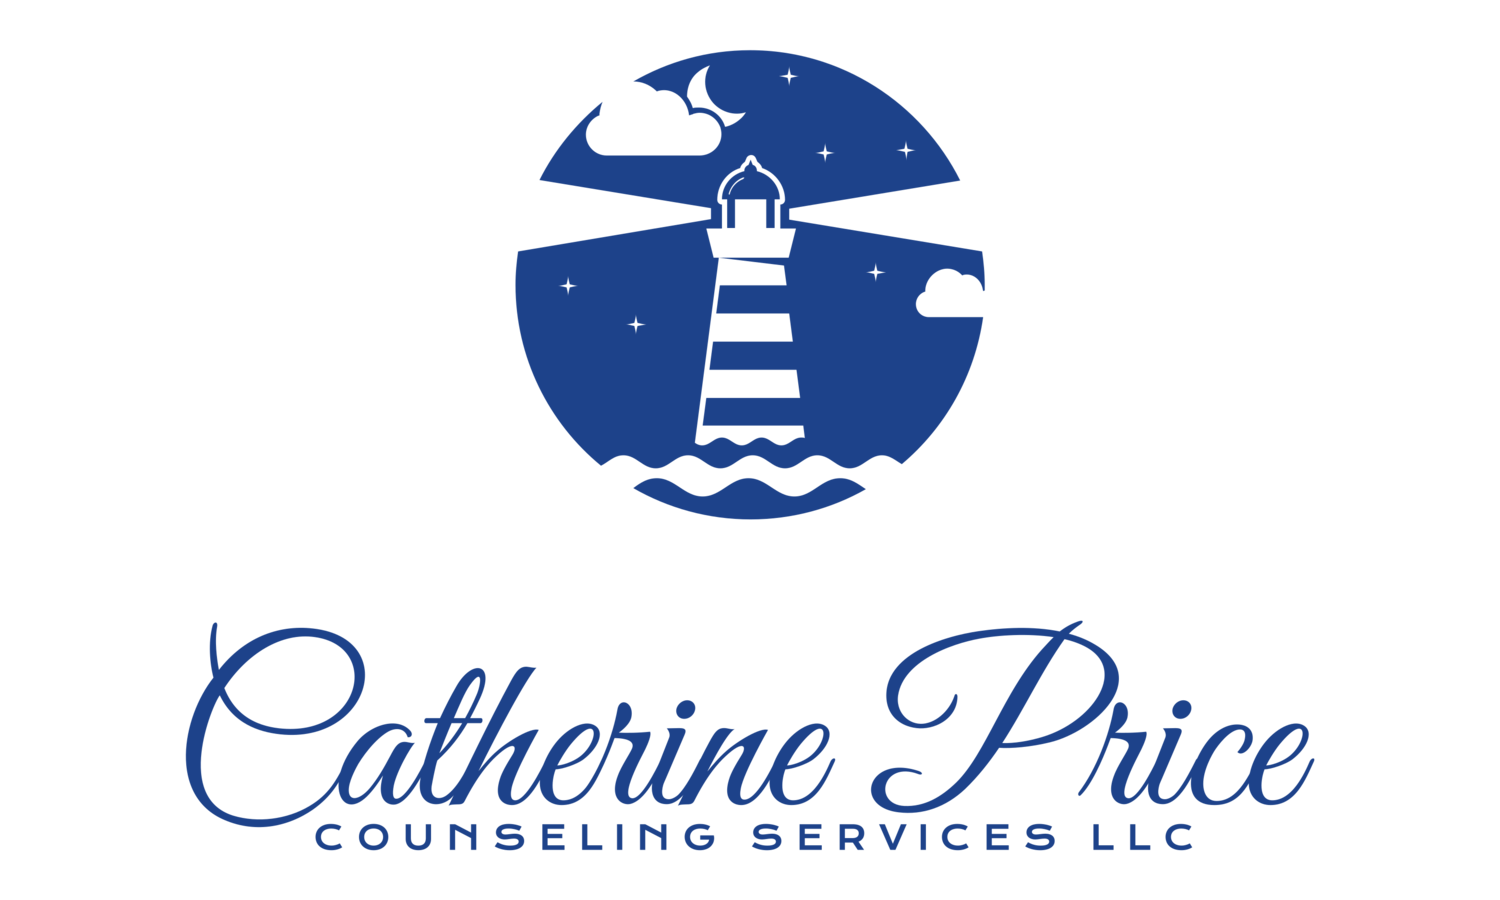 Catherine Price Counseling Services LLC